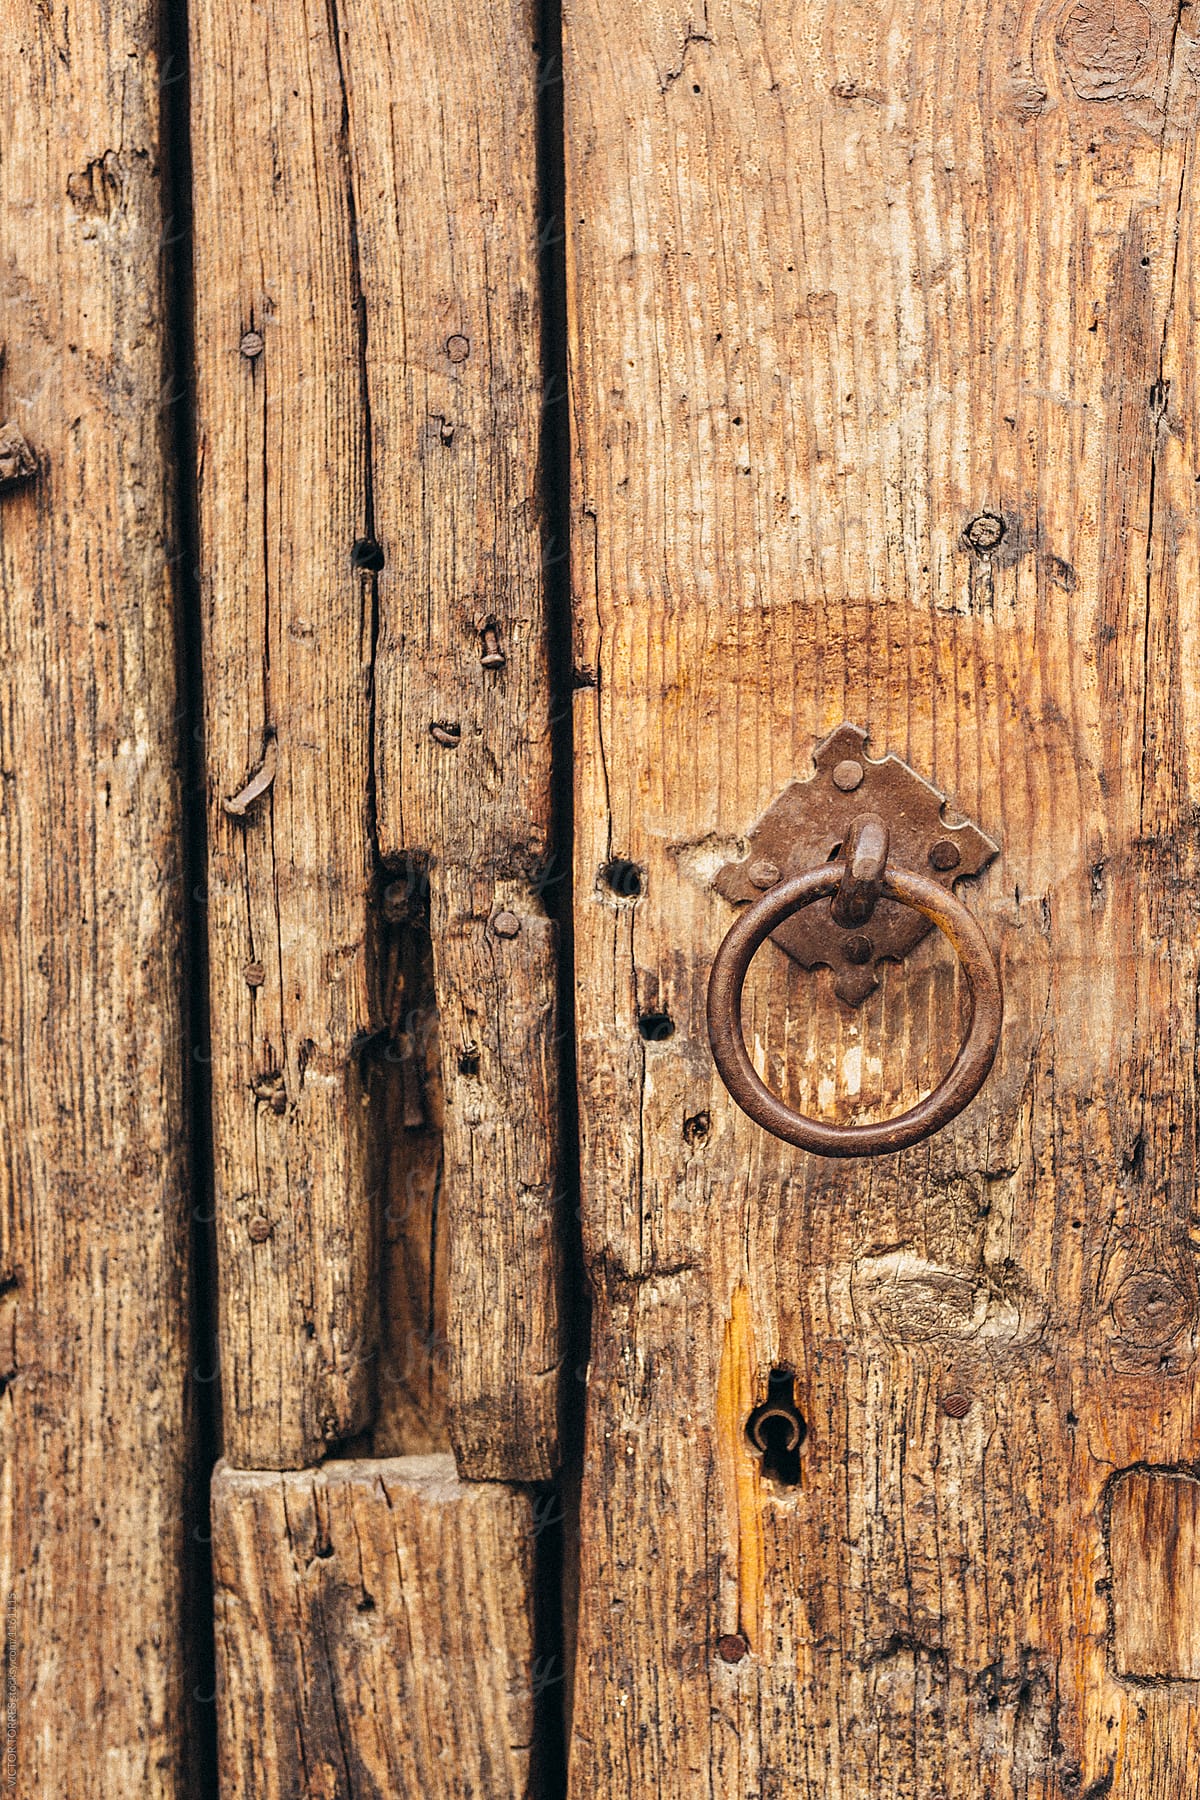 Rusty Ring on a Wooden Old Door